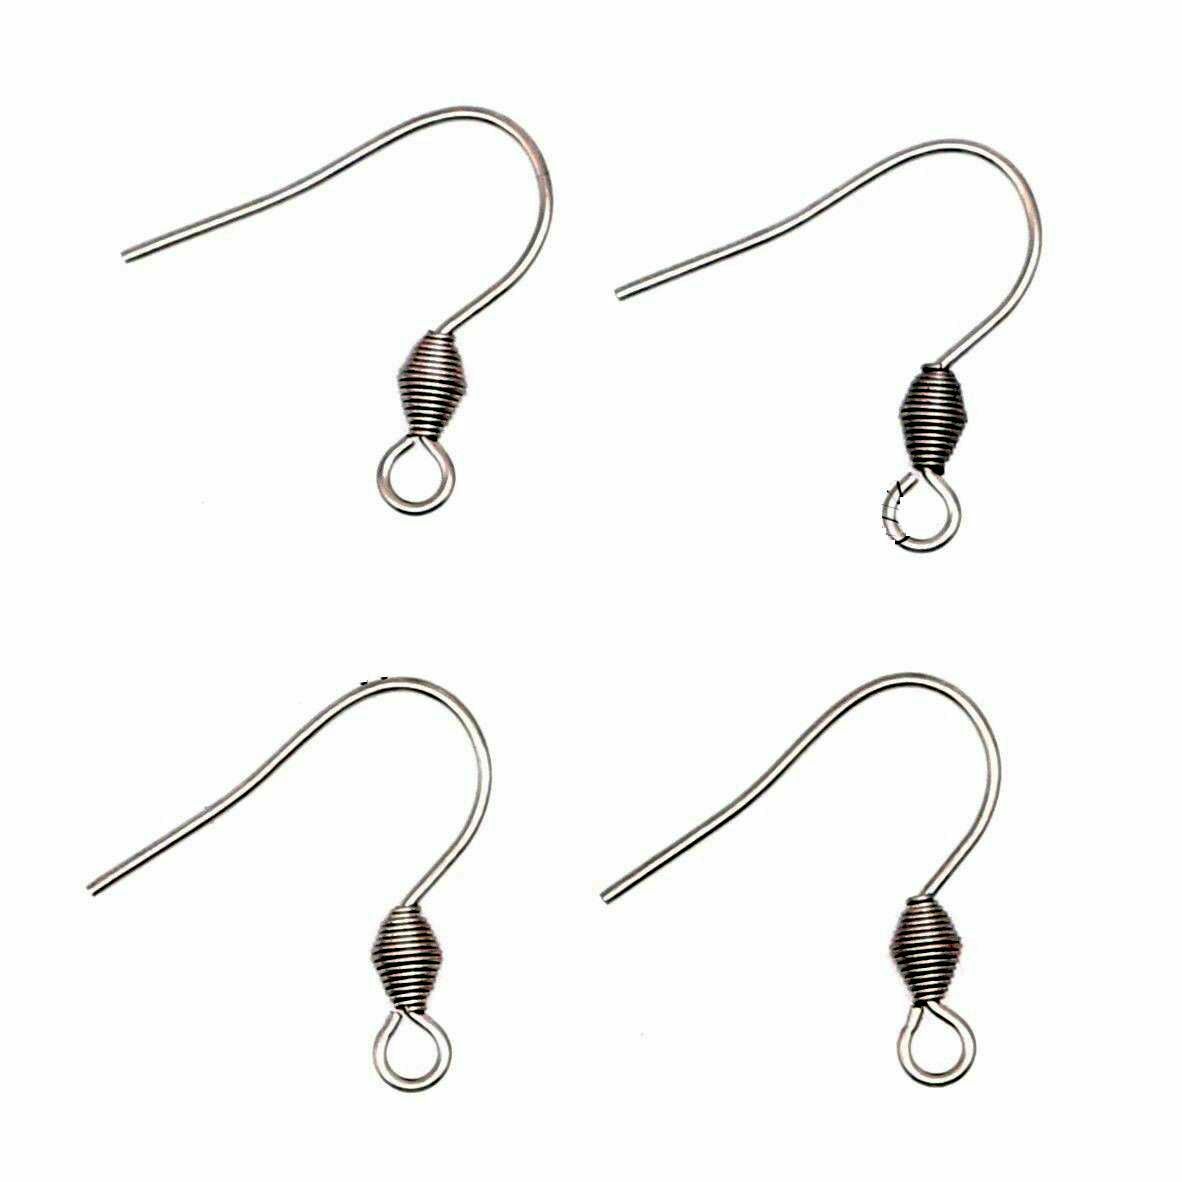 10Pcs Stainless Steel Fish Hook Earring Earwires Crafting 0.70x19mm-5 Pairs